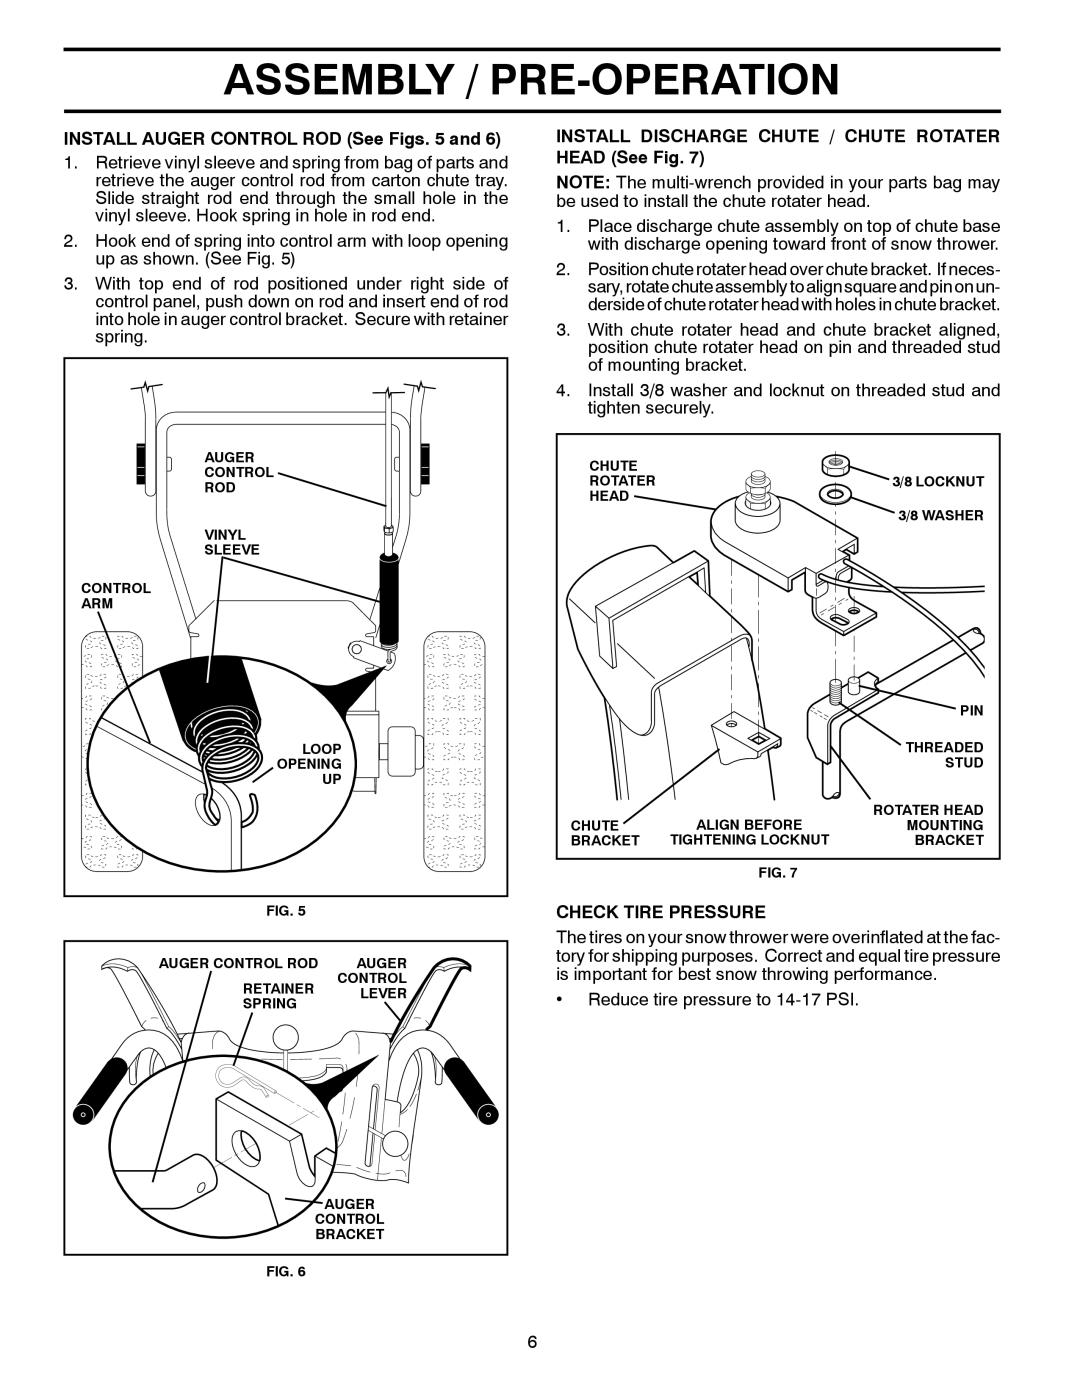 McCulloch 96192004102 owner manual Assembly / Pre-Operation, INSTALL AUGER CONTROL ROD See Figs. 5 and, Check Tire Pressure 